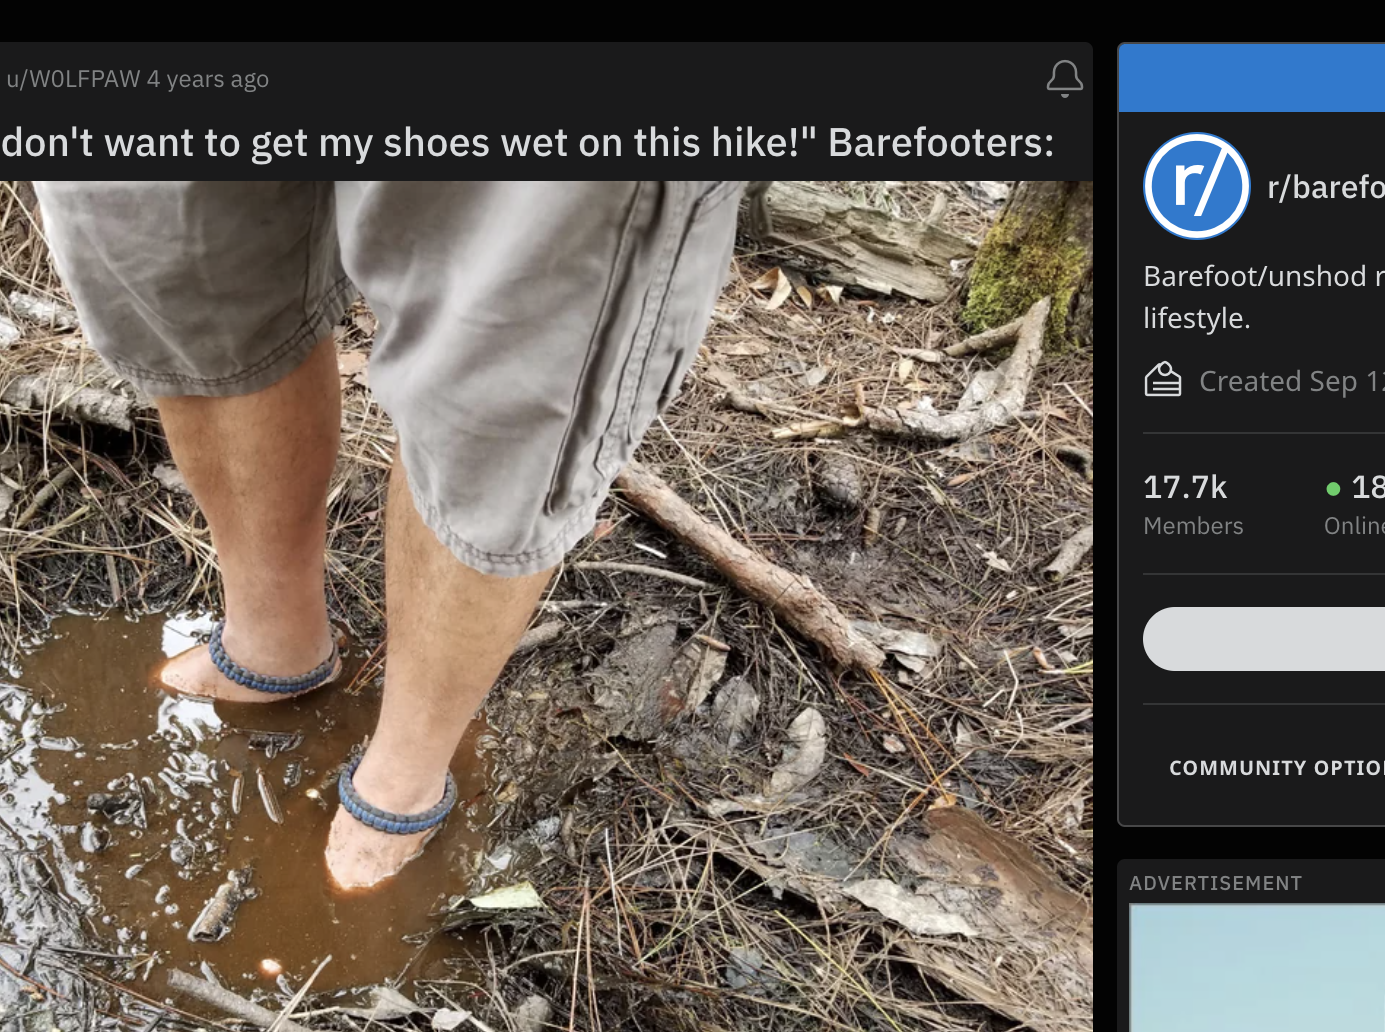 A man has his bare feet submerged in a muddy puddle